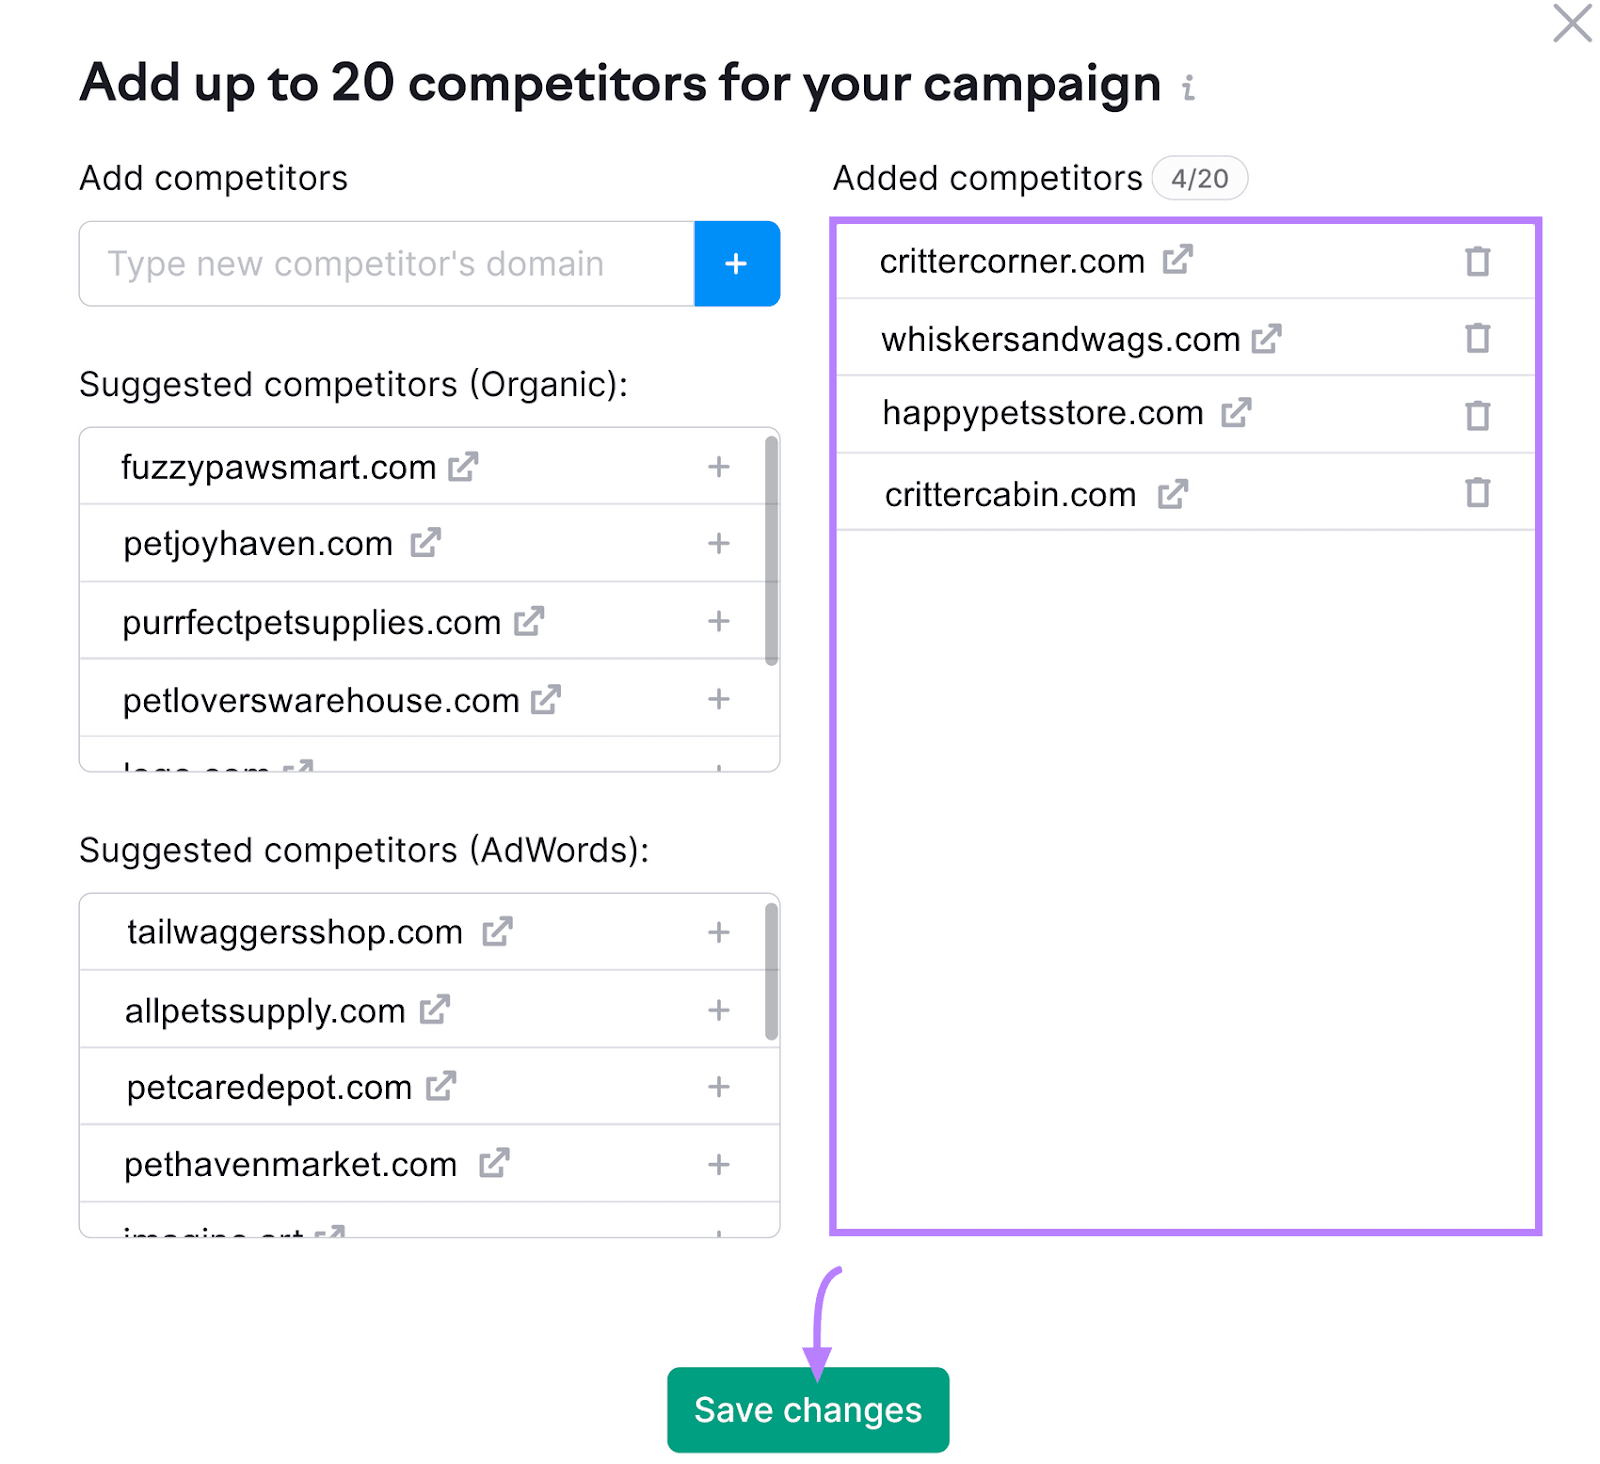 "Add" interface for adding up to 20 competitors with suggested and added competitors and a "Save changes" button.